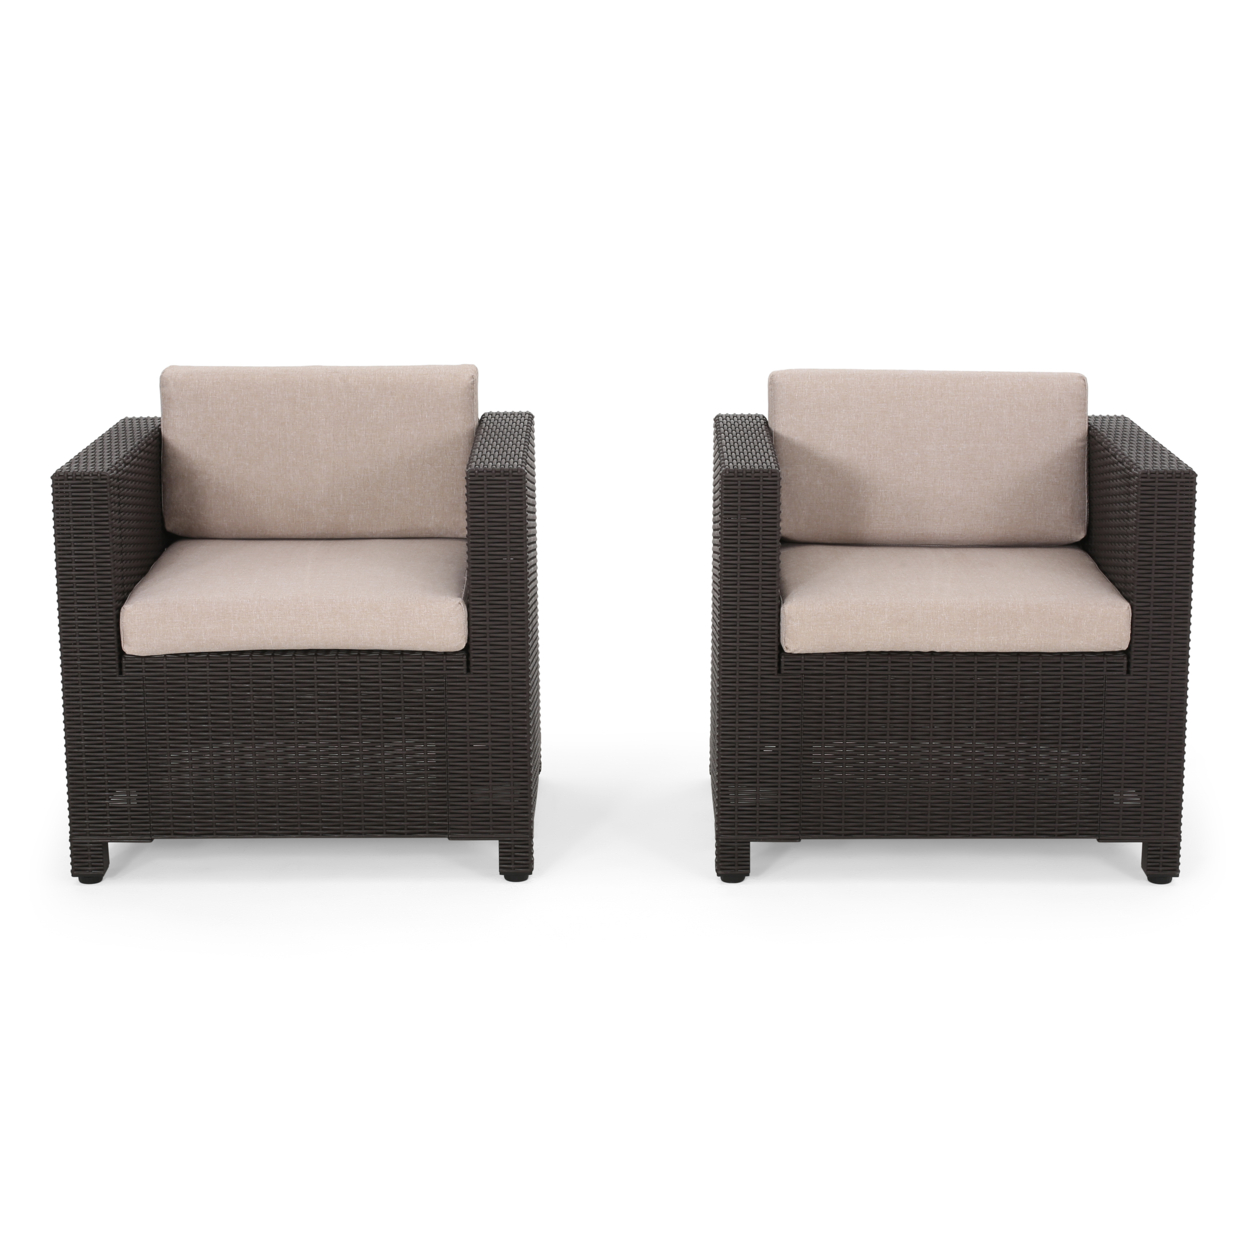 Odessa Outdoor Wicker Club Chair With Cushions (Set Of 2) - Dark Gray + Gray